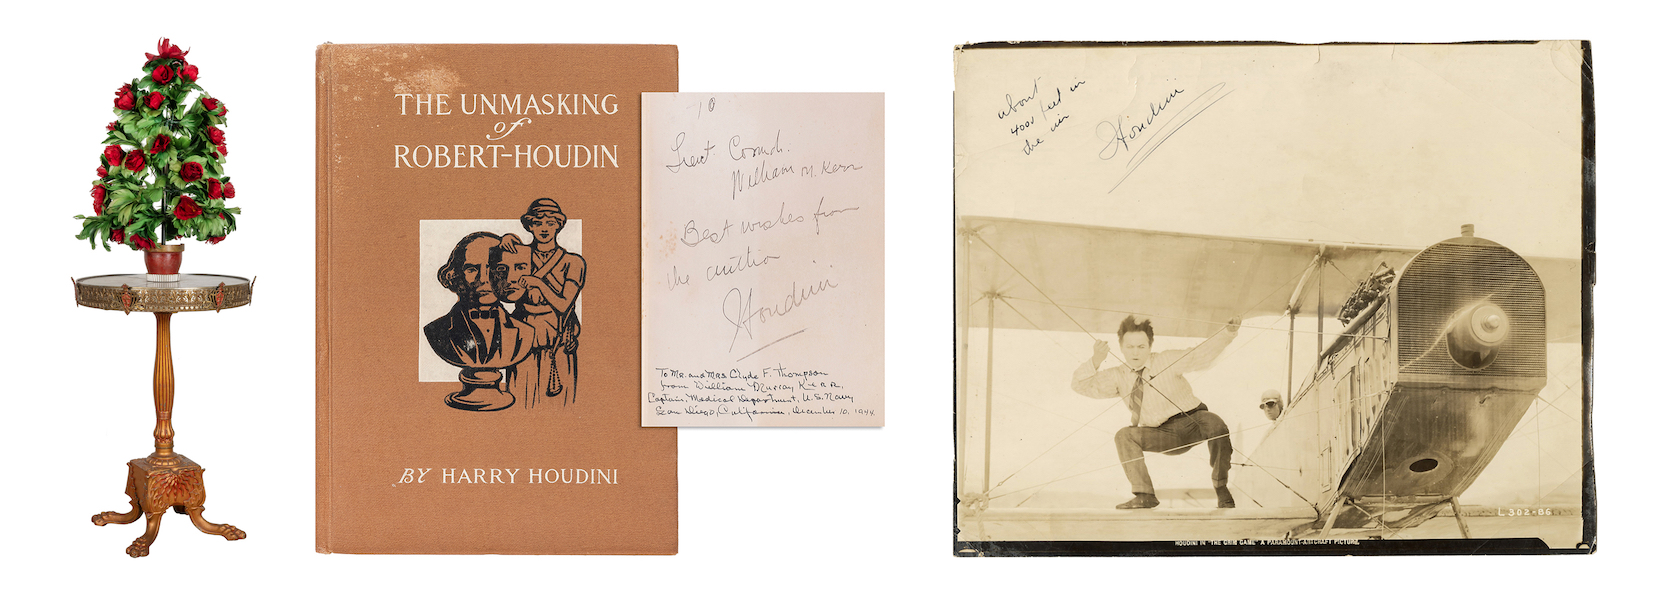 Left, Harry Houdini’s automatic flowering rosebush magic apparatus, estimated at $25,000-$50,000; Center, first edition of Houdini’s book, ‘The Unmasking of Robert-Houdin,’ estimated at $1,500-$2,500; Right, a signed and inscribed movie still of Houdini in the film ‘The Grim Game,’ estimated at $2,500-$5,000.